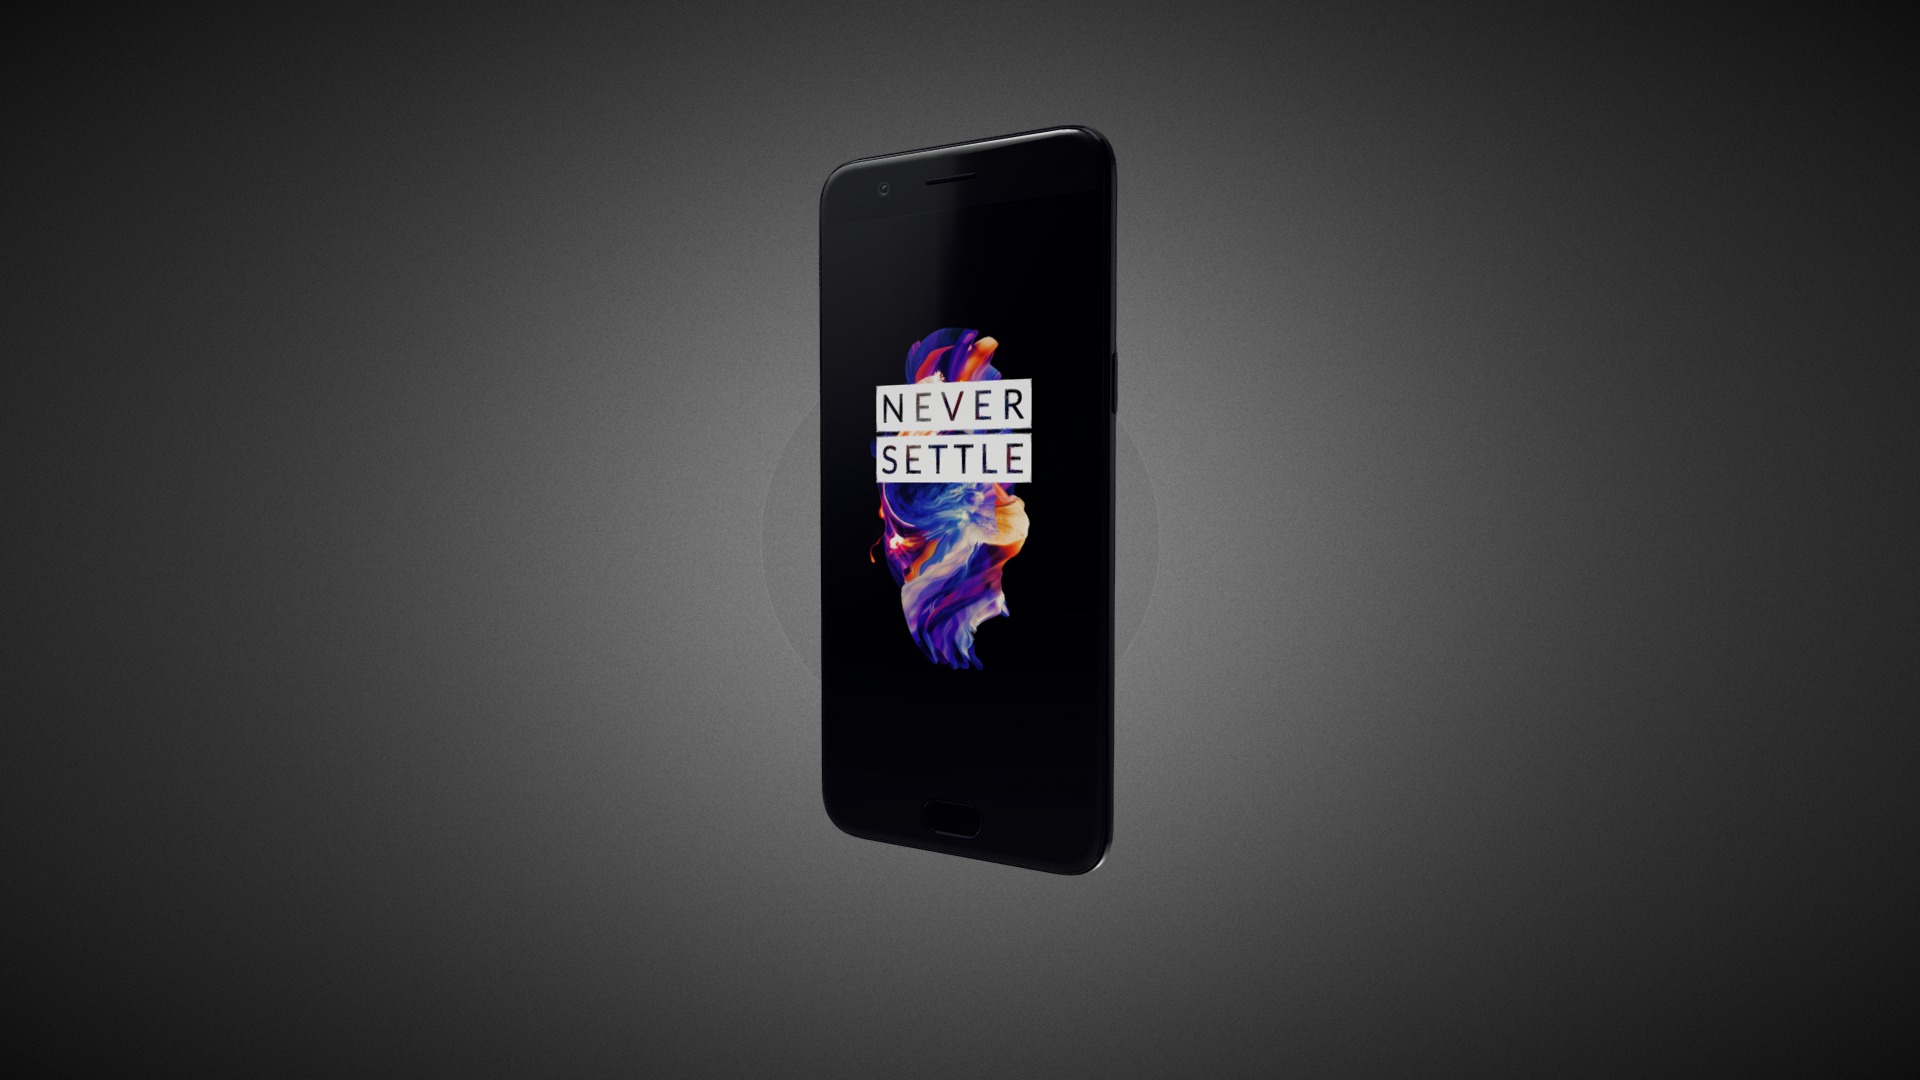 3D model OnePlus 5 for Element 3D - This is a 3D model of the OnePlus 5 for Element 3D. The 3D model is about a black cell phone.